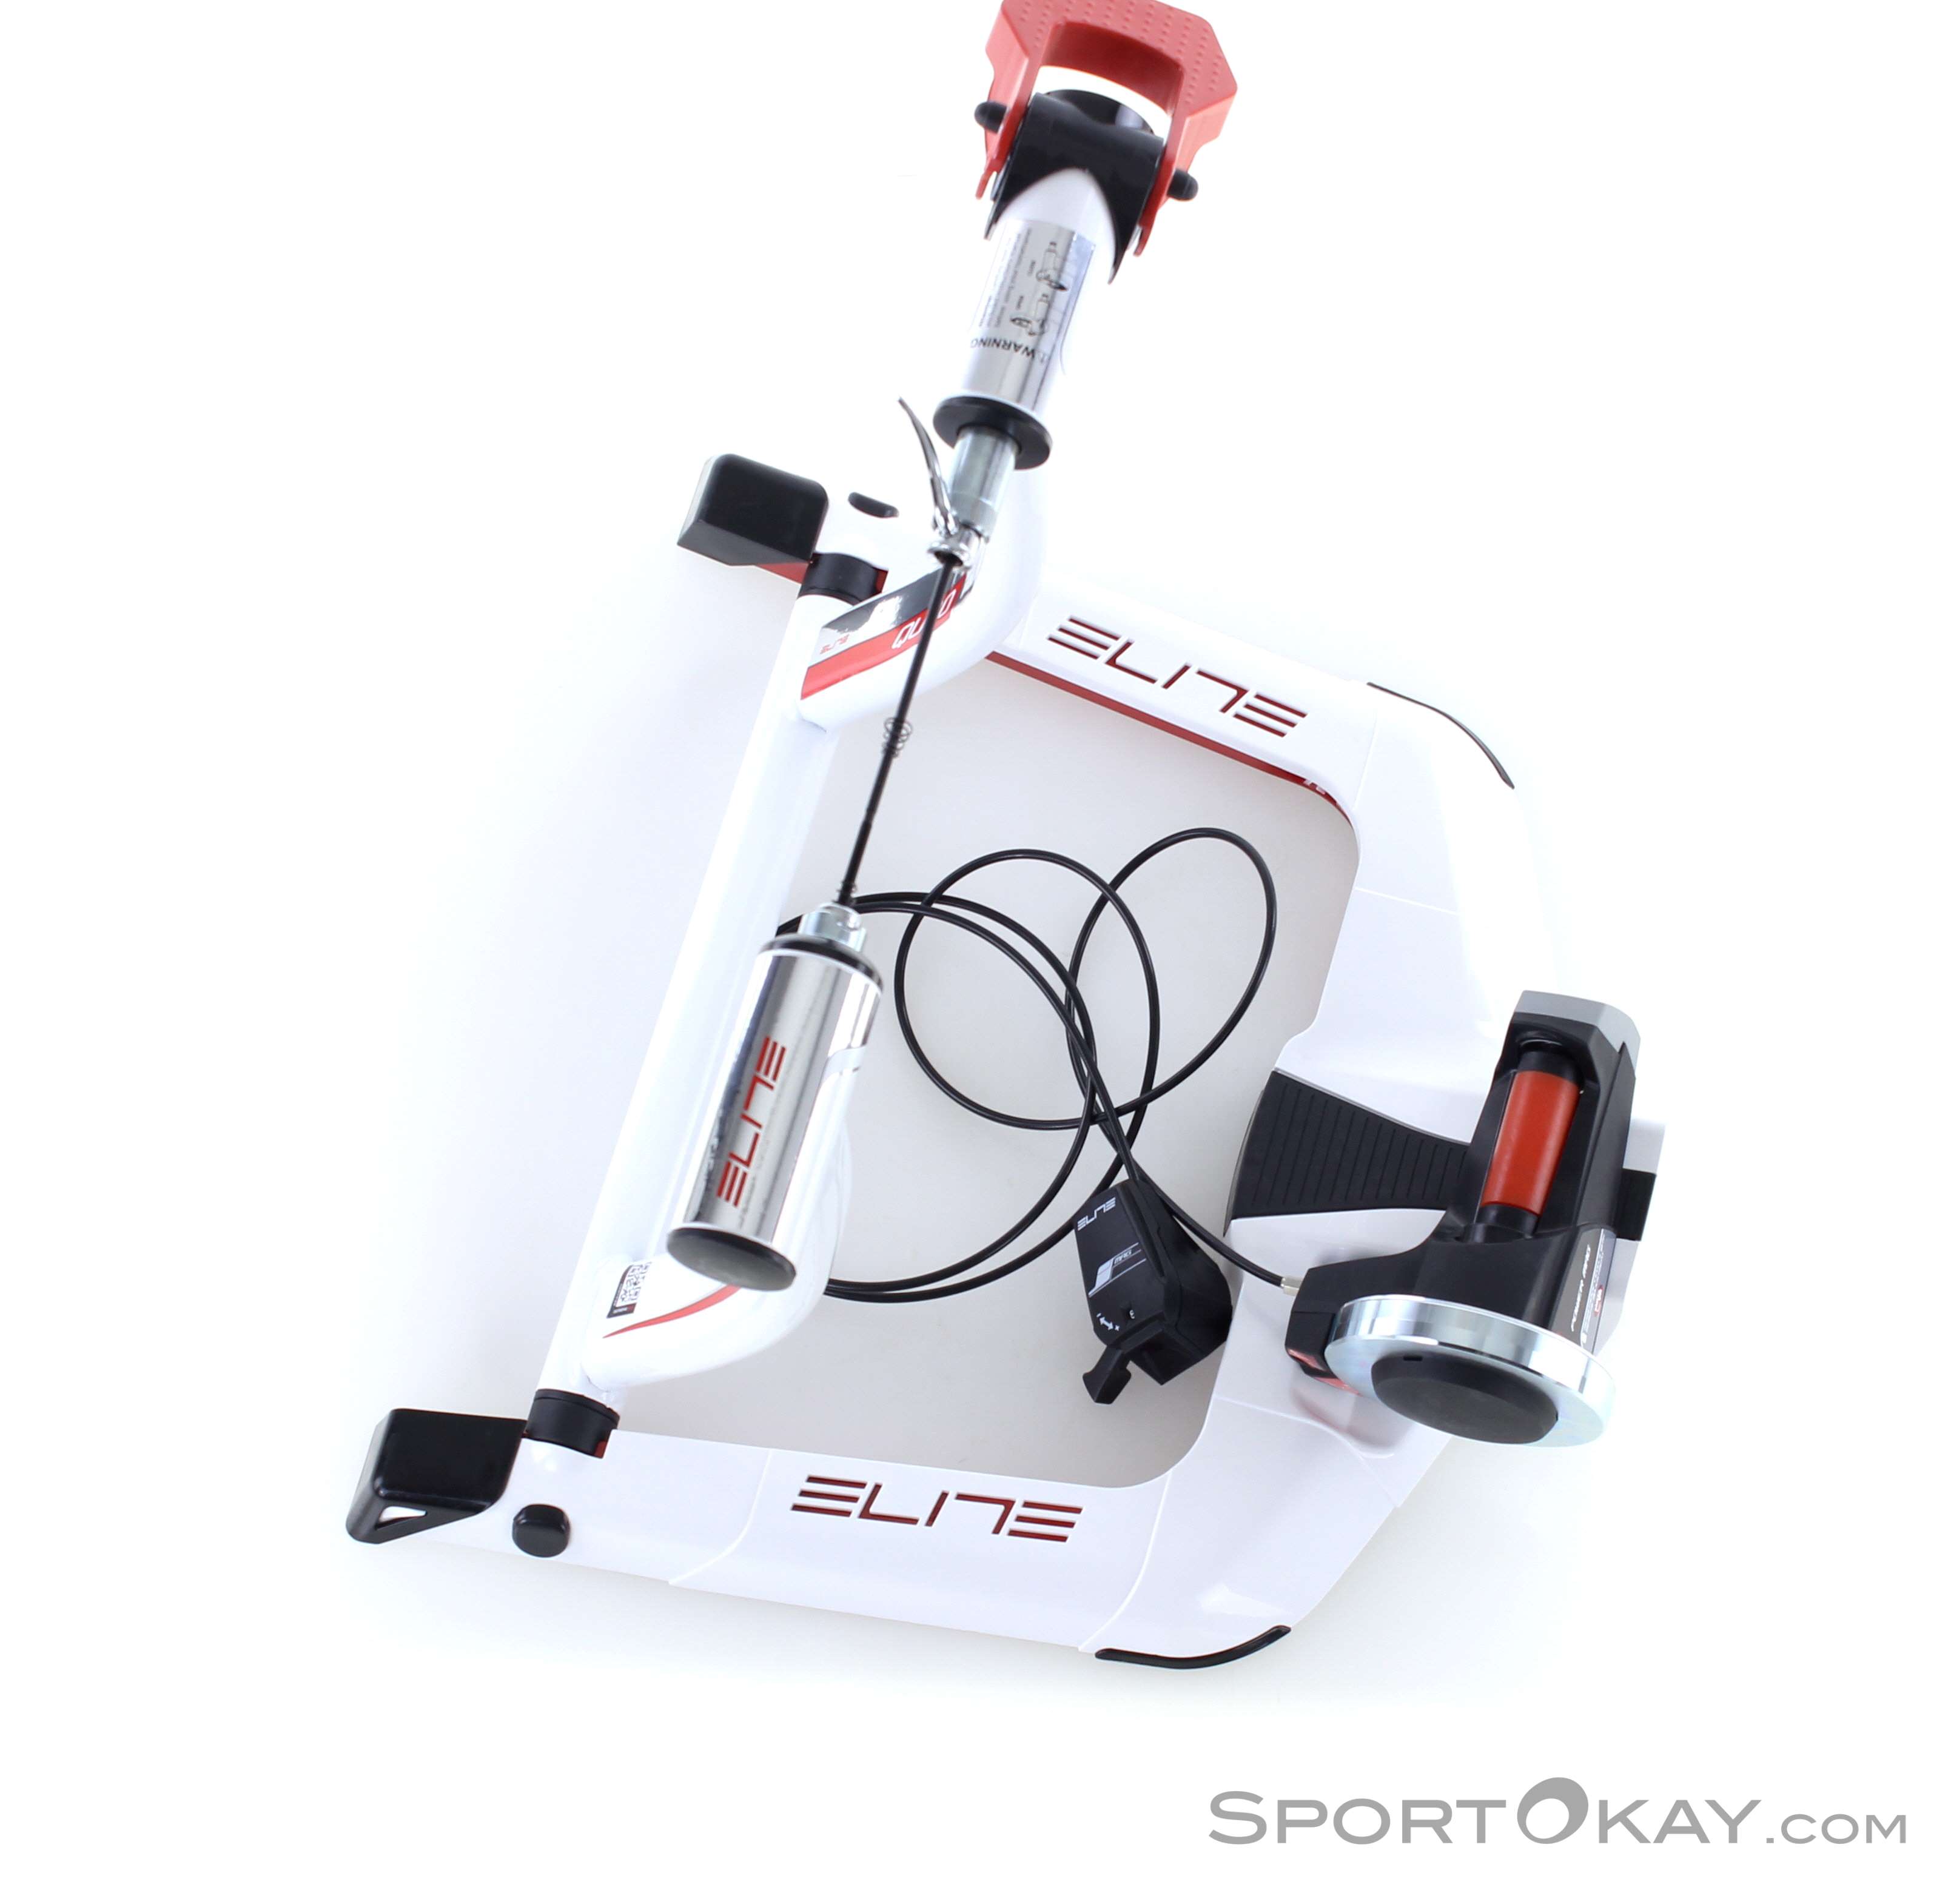 Elite Qubo Power Mag Smart B+ home trainer - Roll Trainer - Accessory -  Bike - All